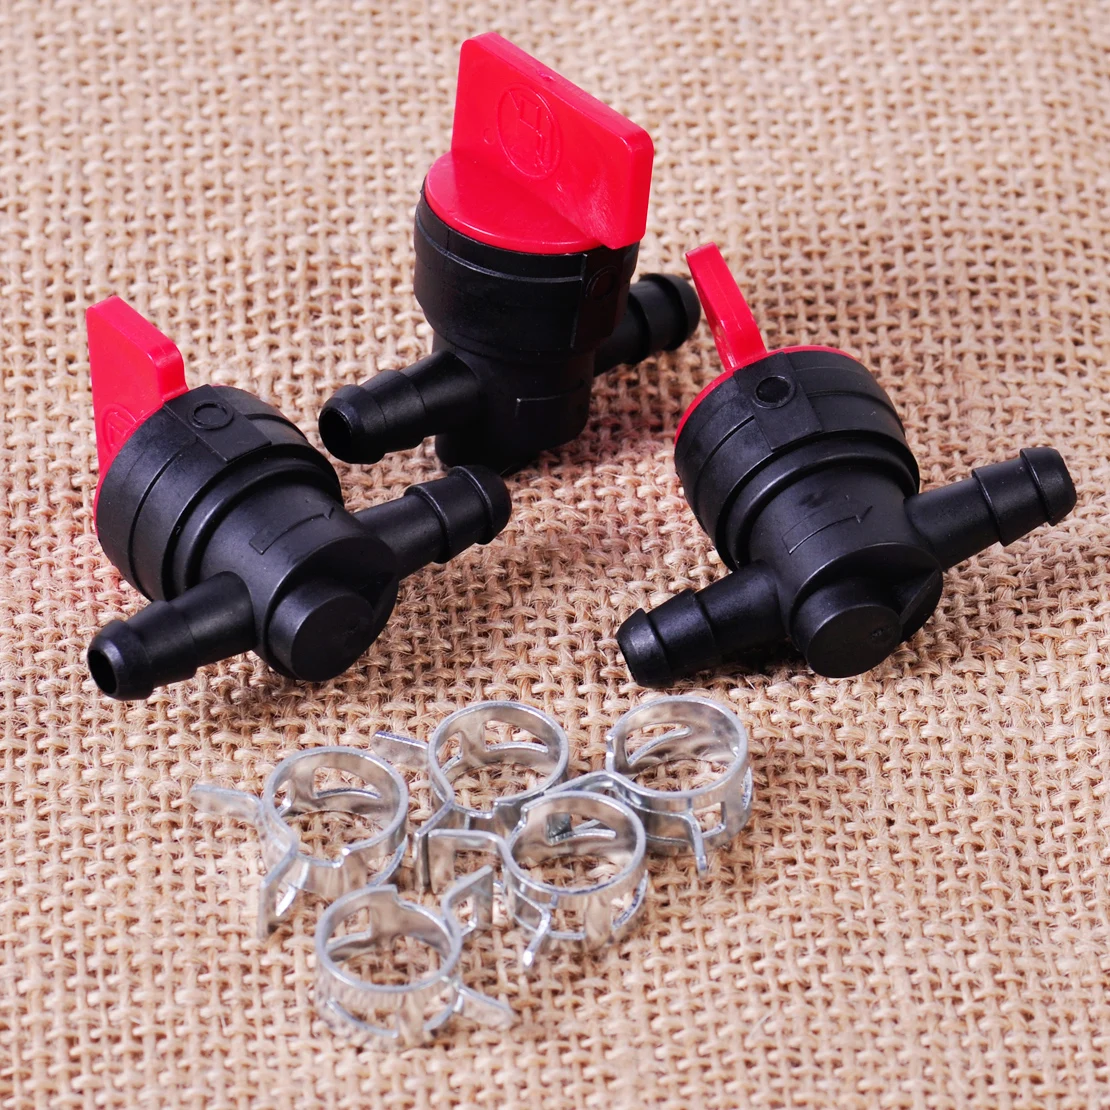 

LETAOSK 3pcs High Quality 1/4" InLine Fuel Gas Cut-Off Shut-Off Valve Petcock + 6pcs Clamps for Briggs Stratton